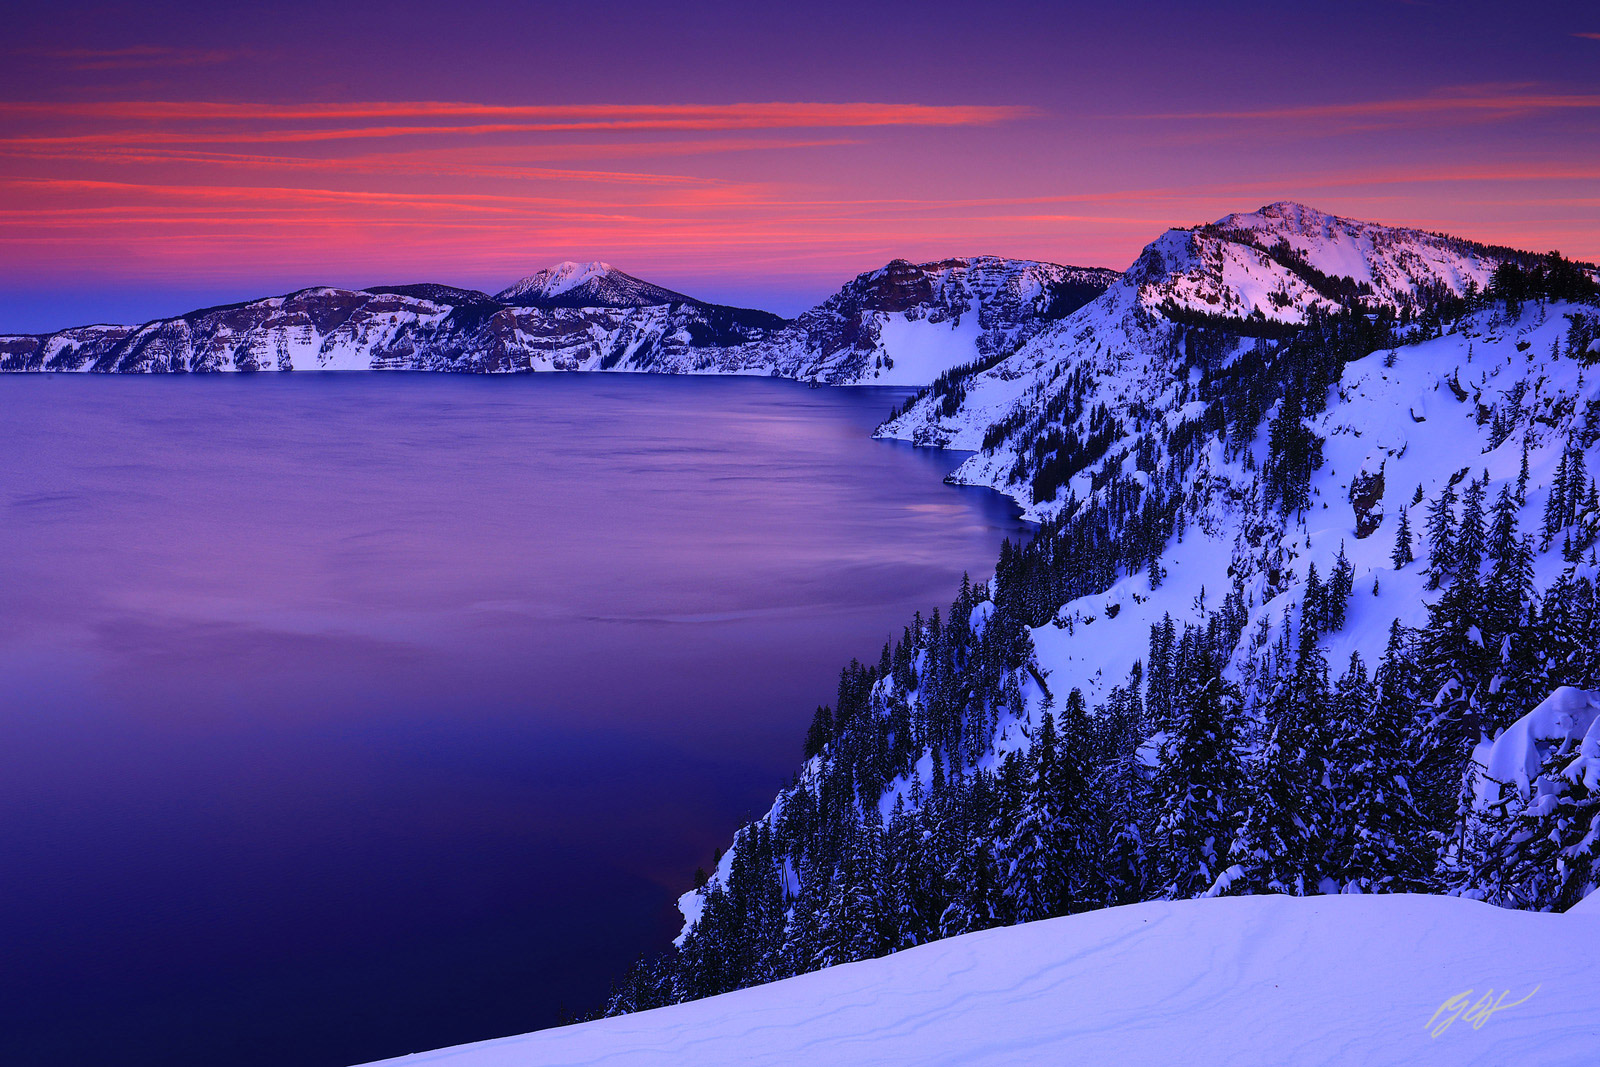 Winter Sunset over Crater Lake from Crater Lake National Park in Oregon